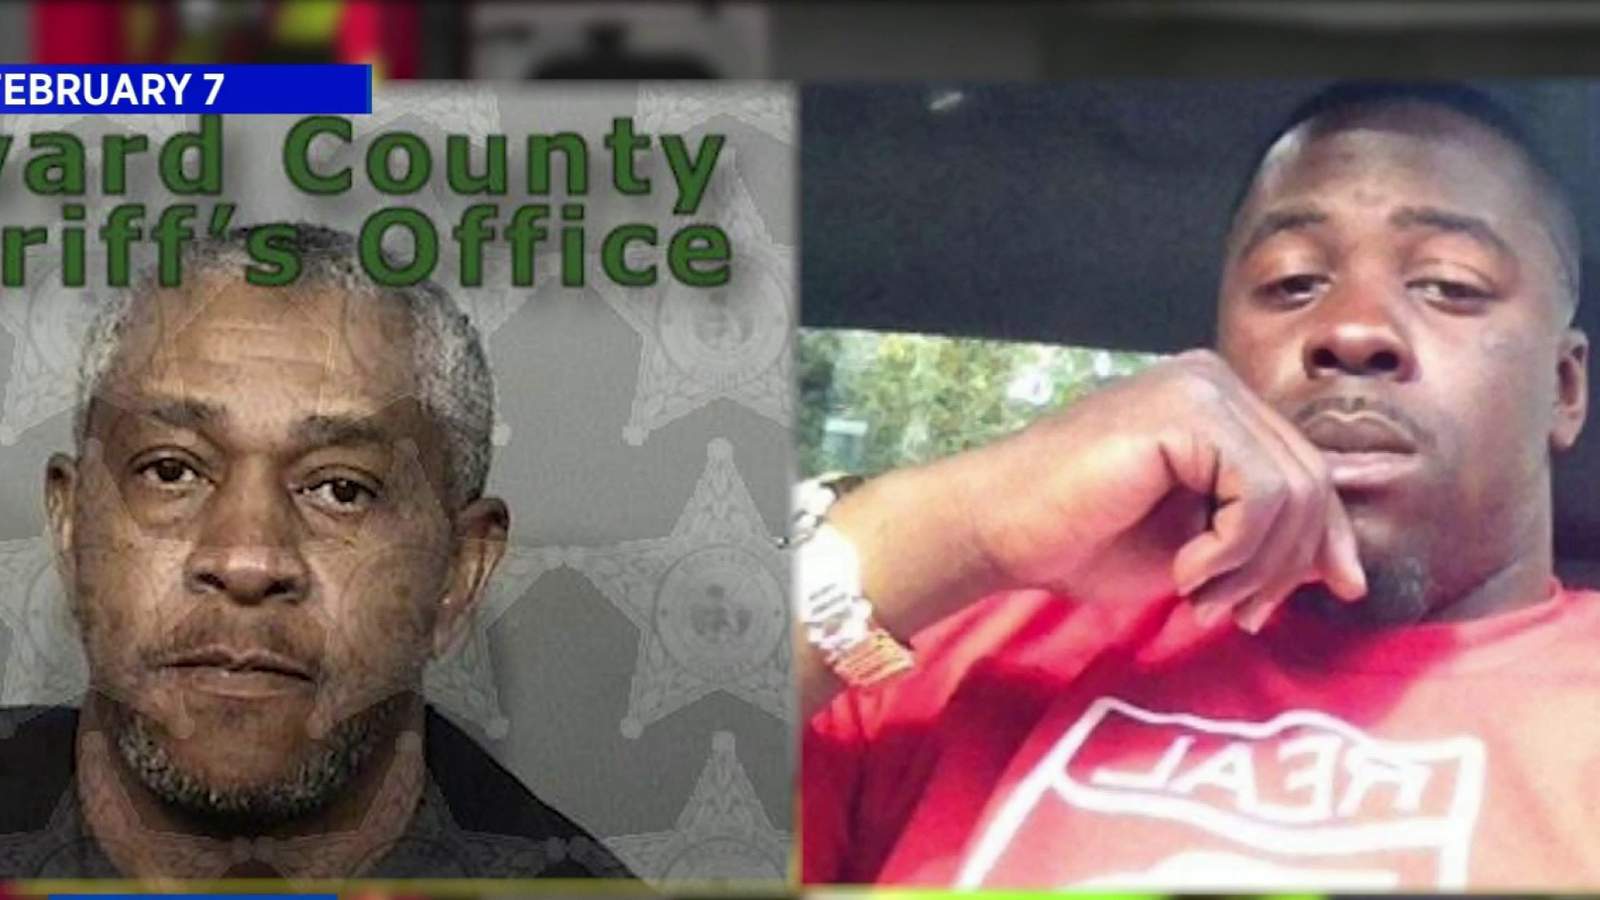 Arrest made in shooting death of 28-year-old man in Rockledge